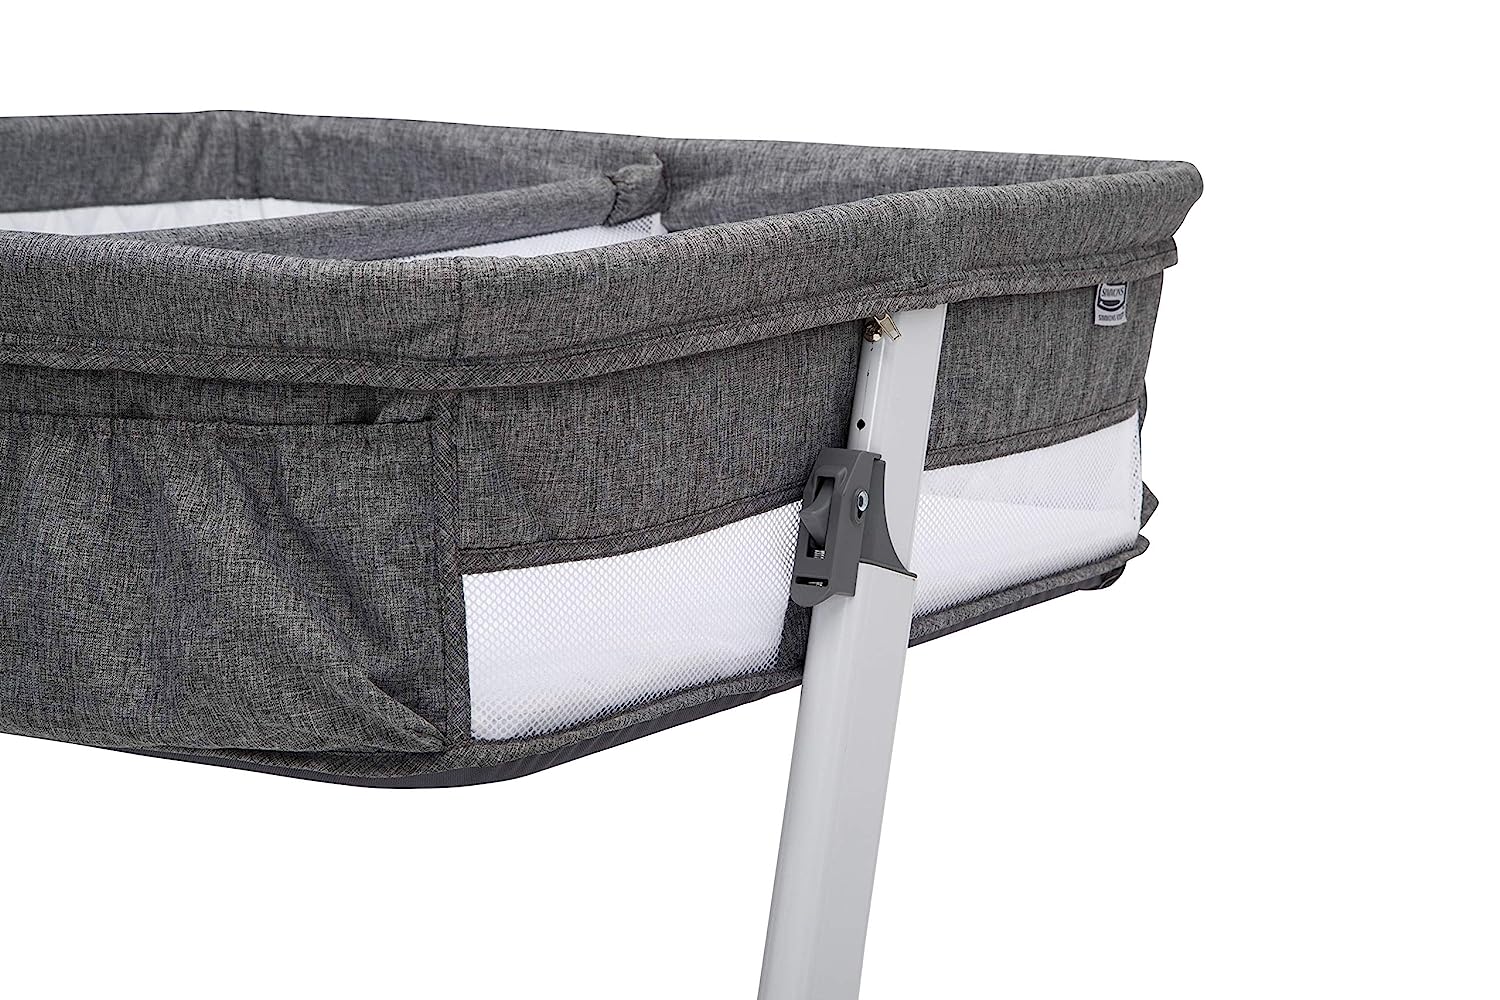 Simmons Kids By The Bed City Sleeper Bassinet for Twins, Grey Tweed - $120